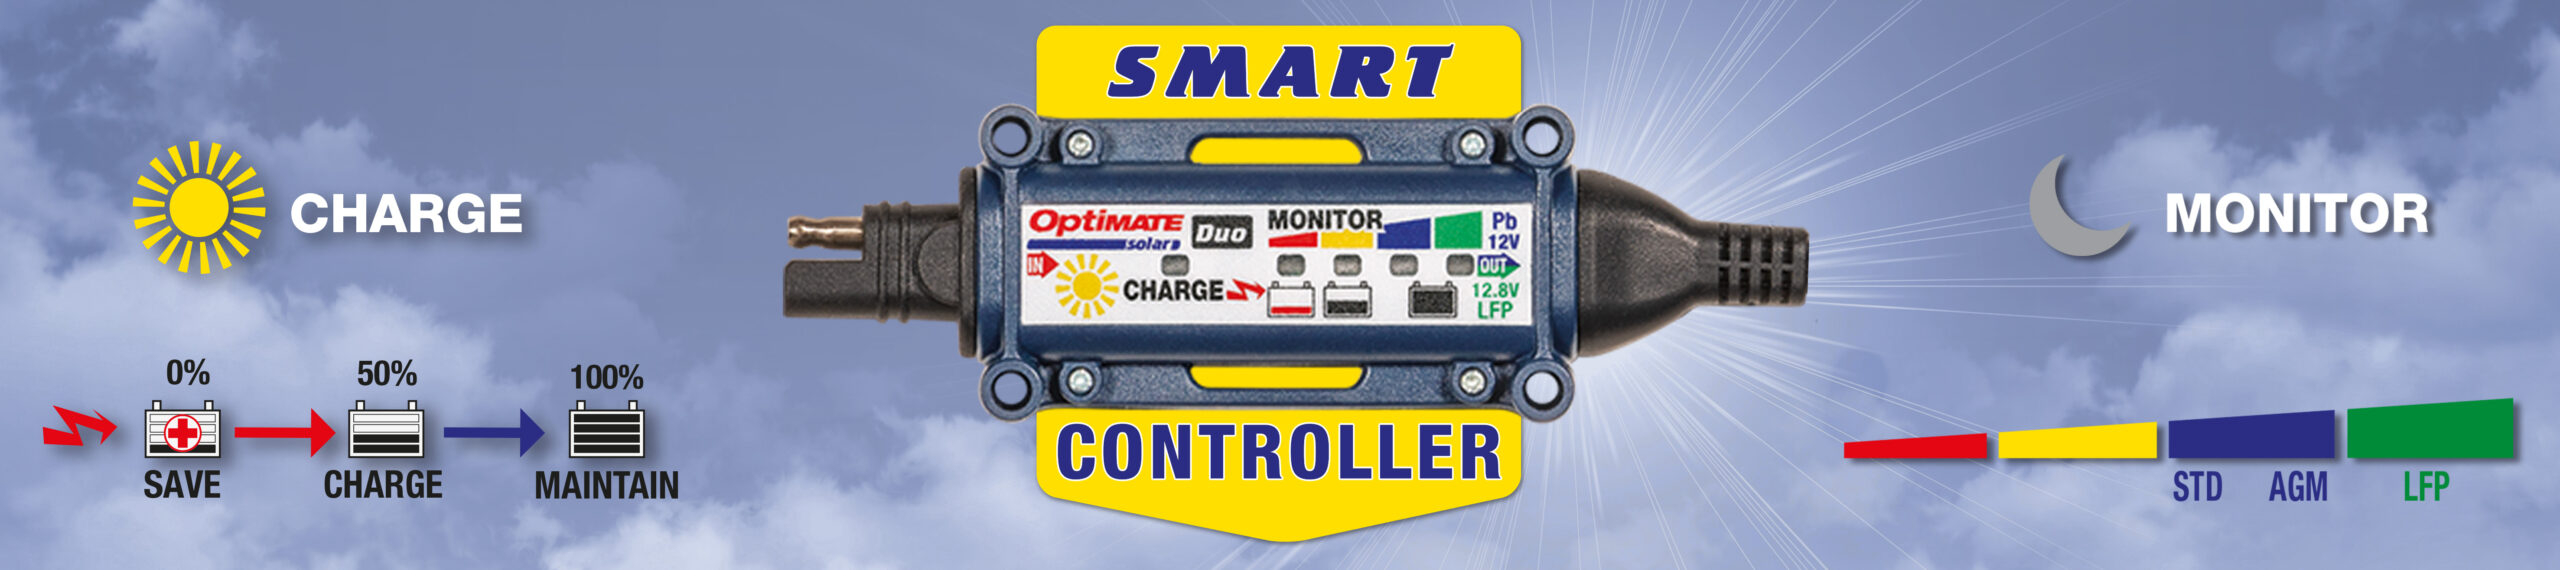 OptiMate charge controller with charge mode and with monitor mode